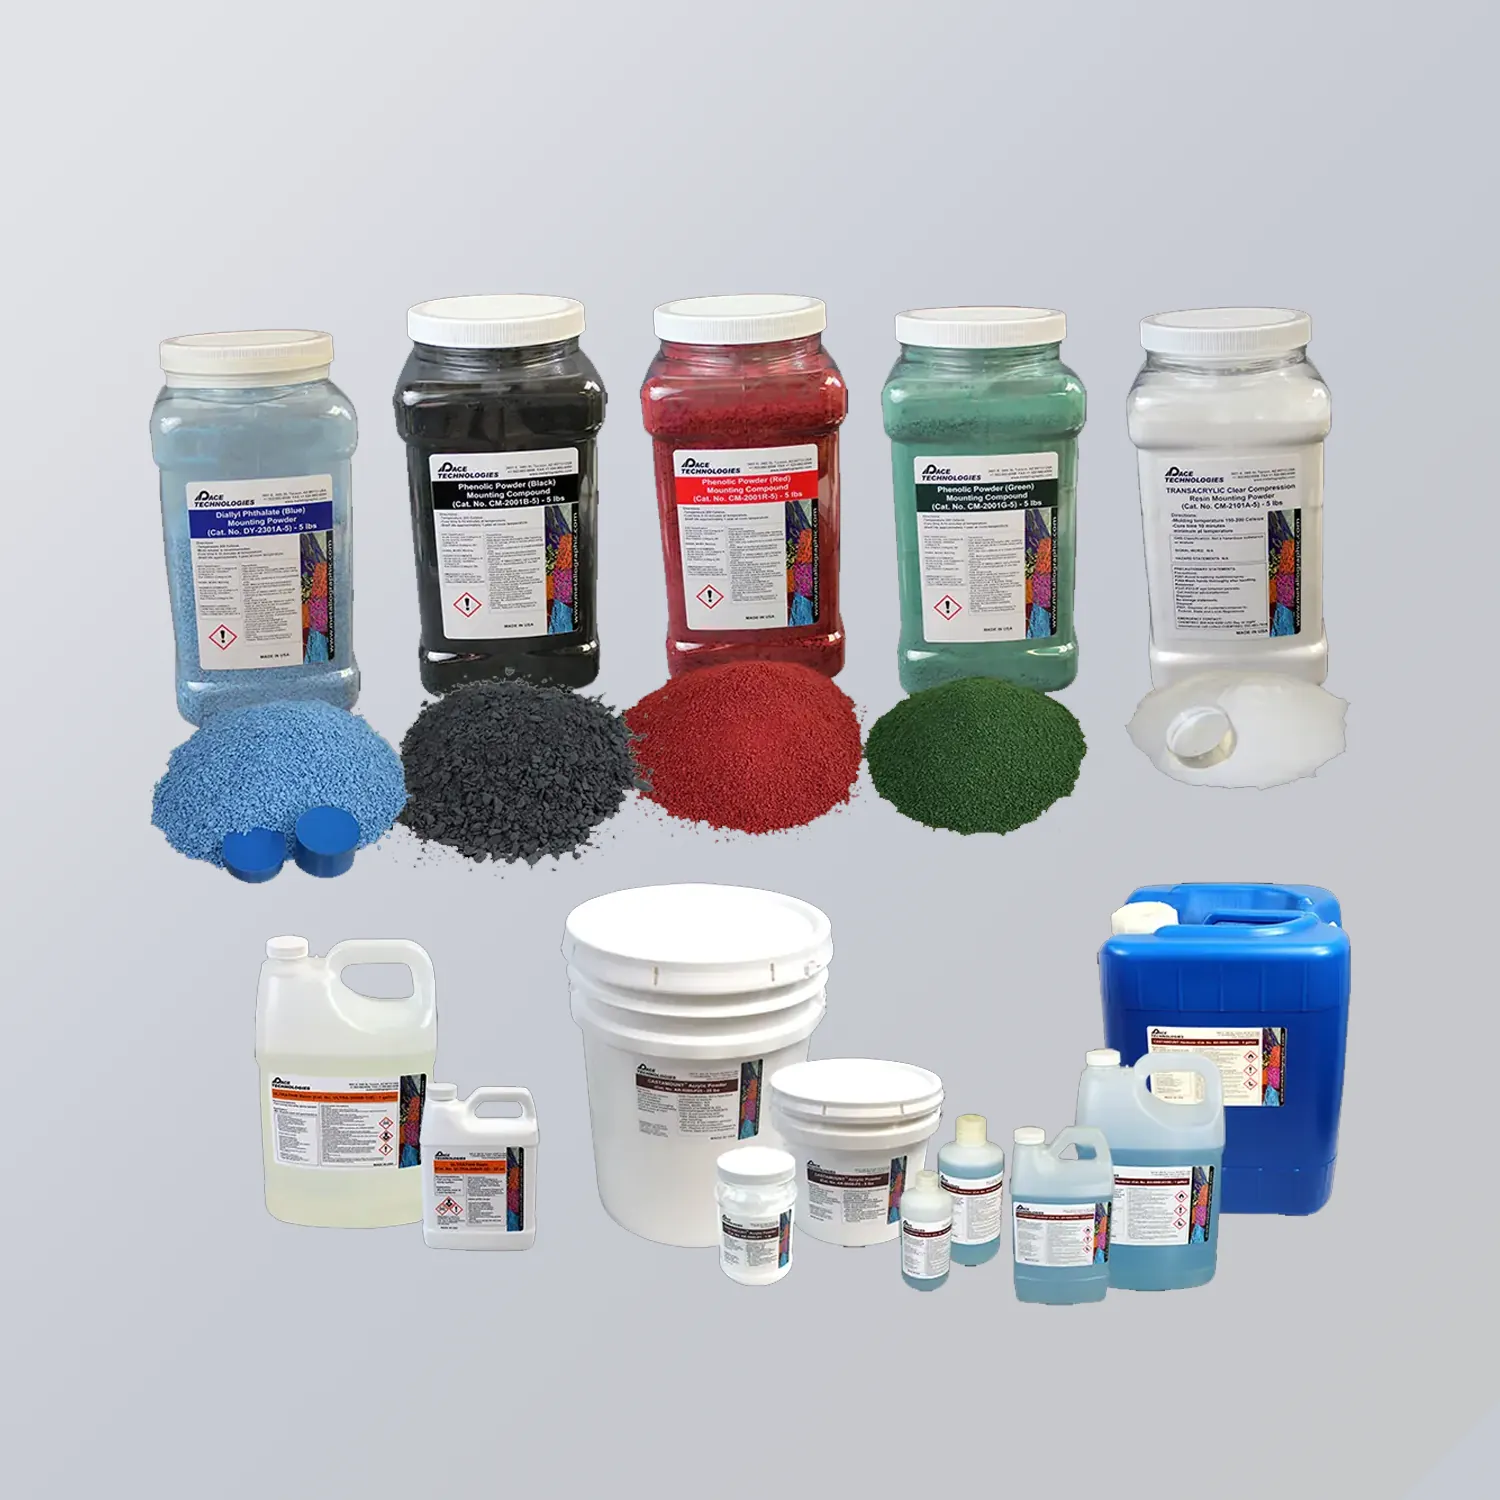 Metallographic mounting consumables